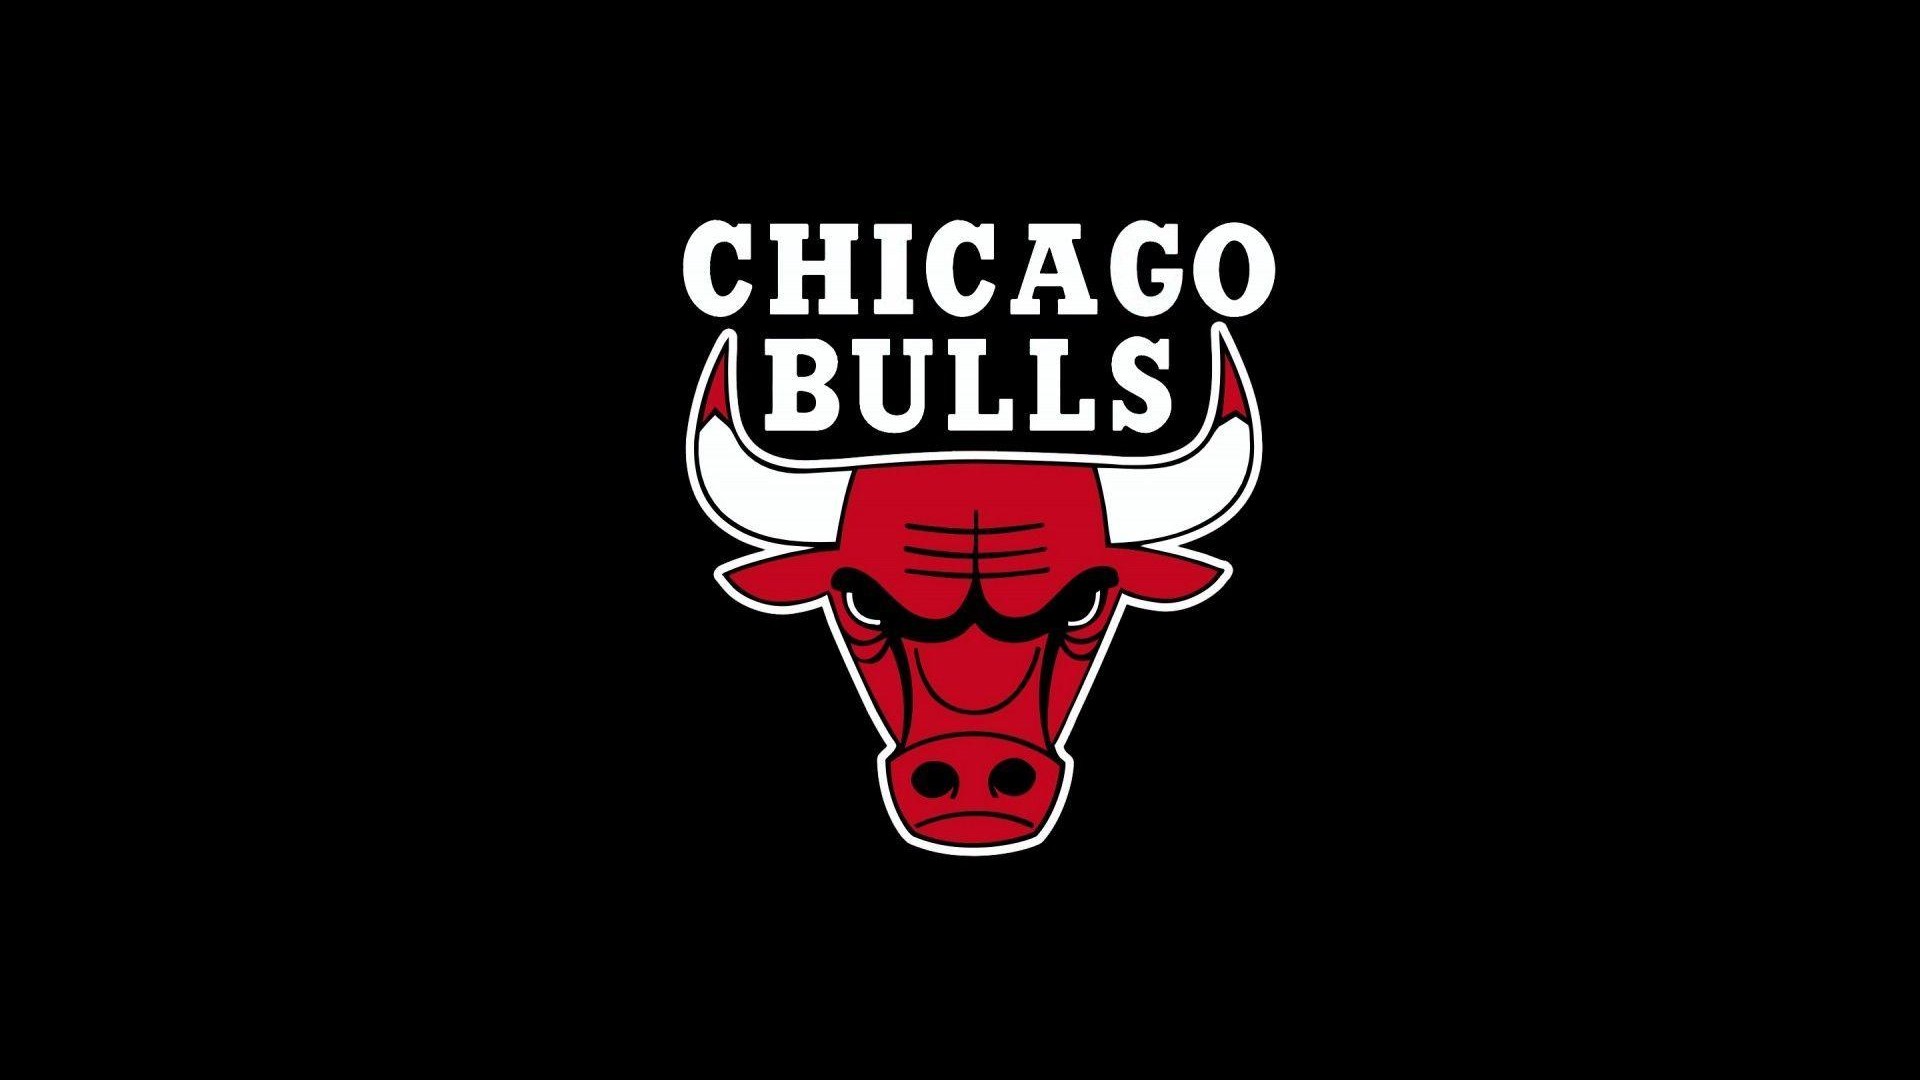 HD Desktop Wallpaper Chicago Bulls with high-resolution 1920x1080 pixel. You can use this wallpaper for your Desktop Computer Backgrounds, Windows or Mac Screensavers, iPhone Lock screen, Tablet or Android and another Mobile Phone device